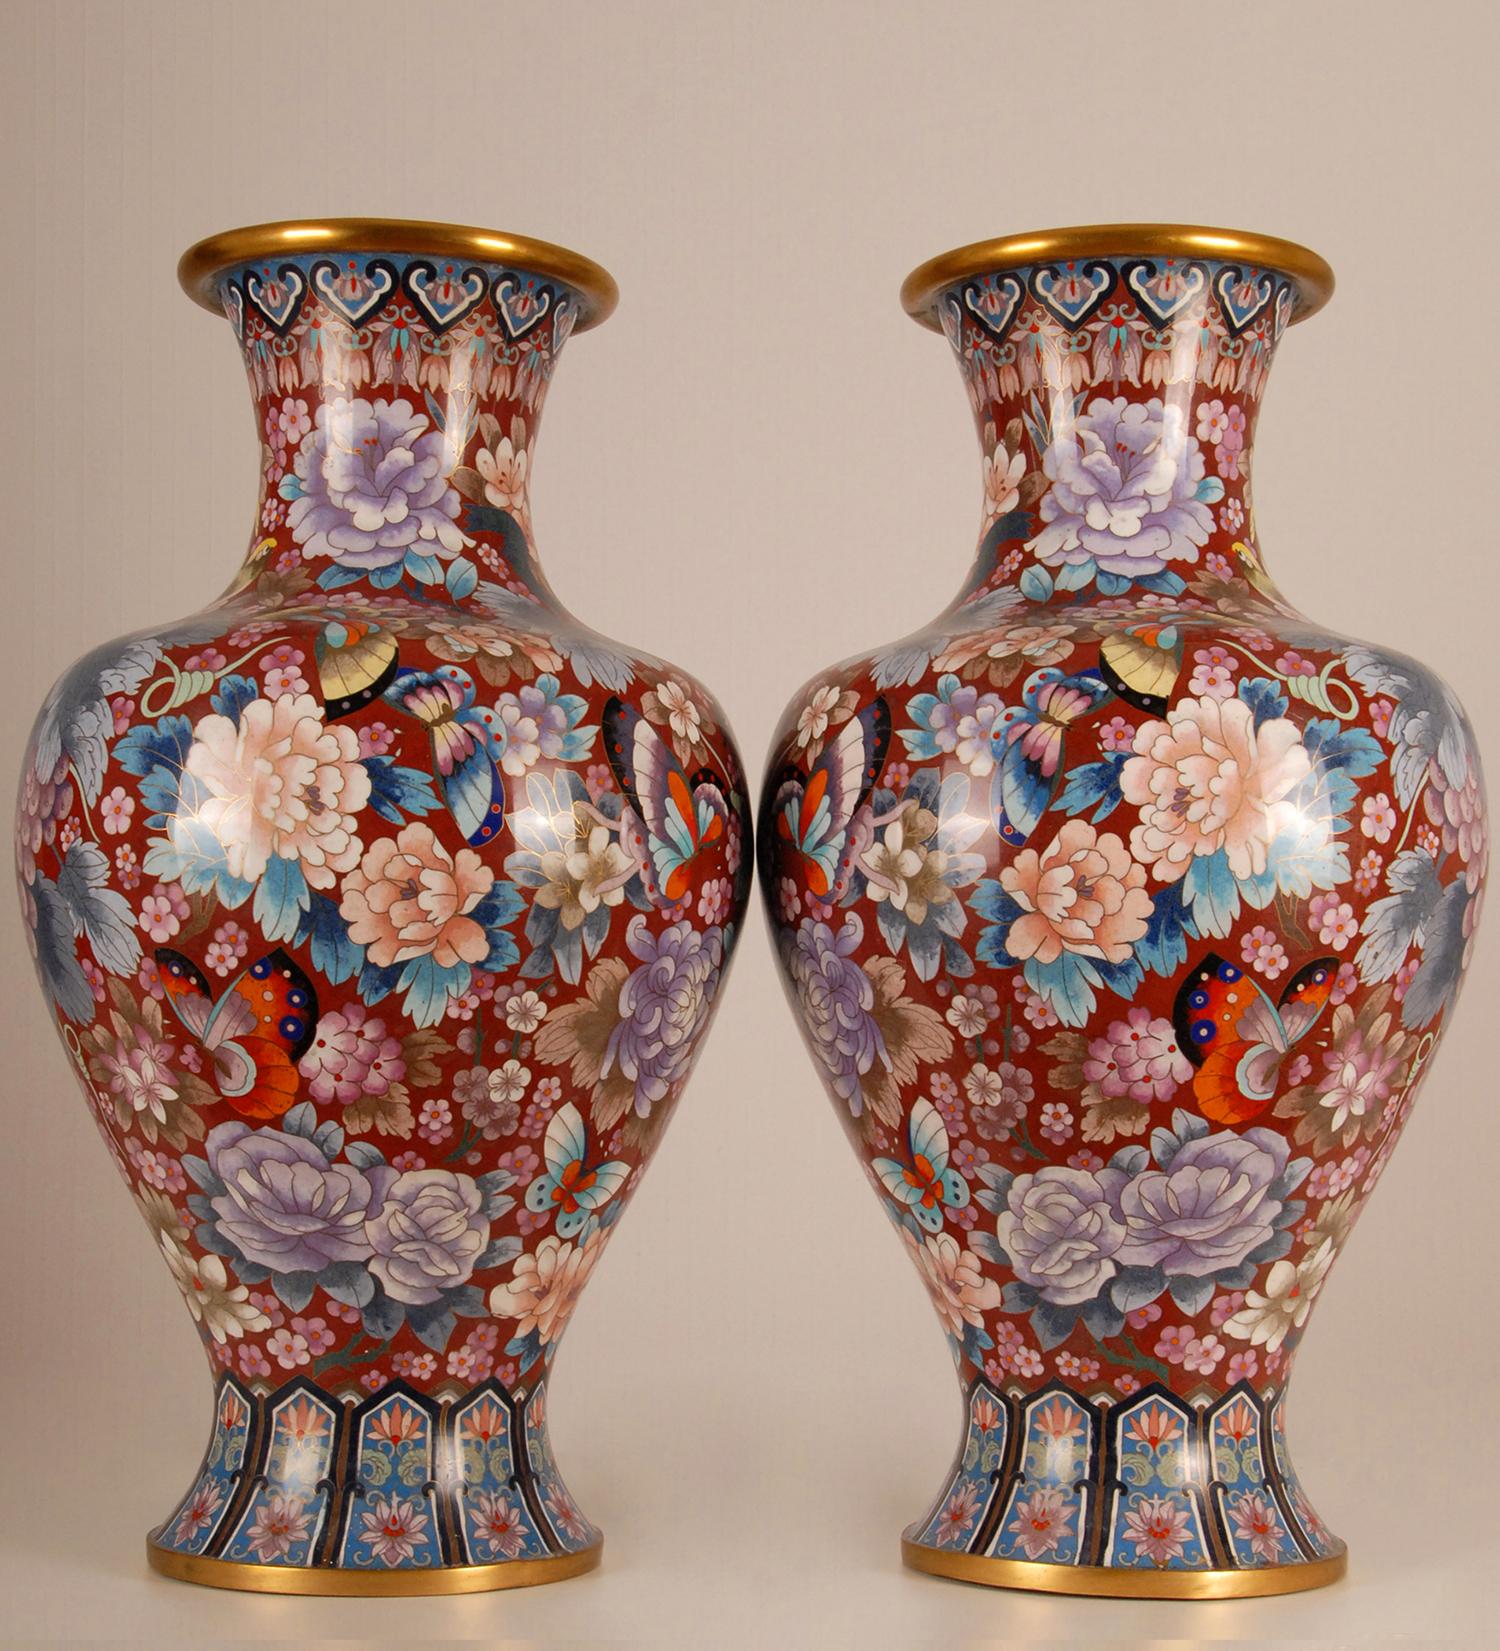 20th Century Chinese Cloisonne Gilded Bronze Baluster Vases Enameled Republic Vases a Pair For Sale